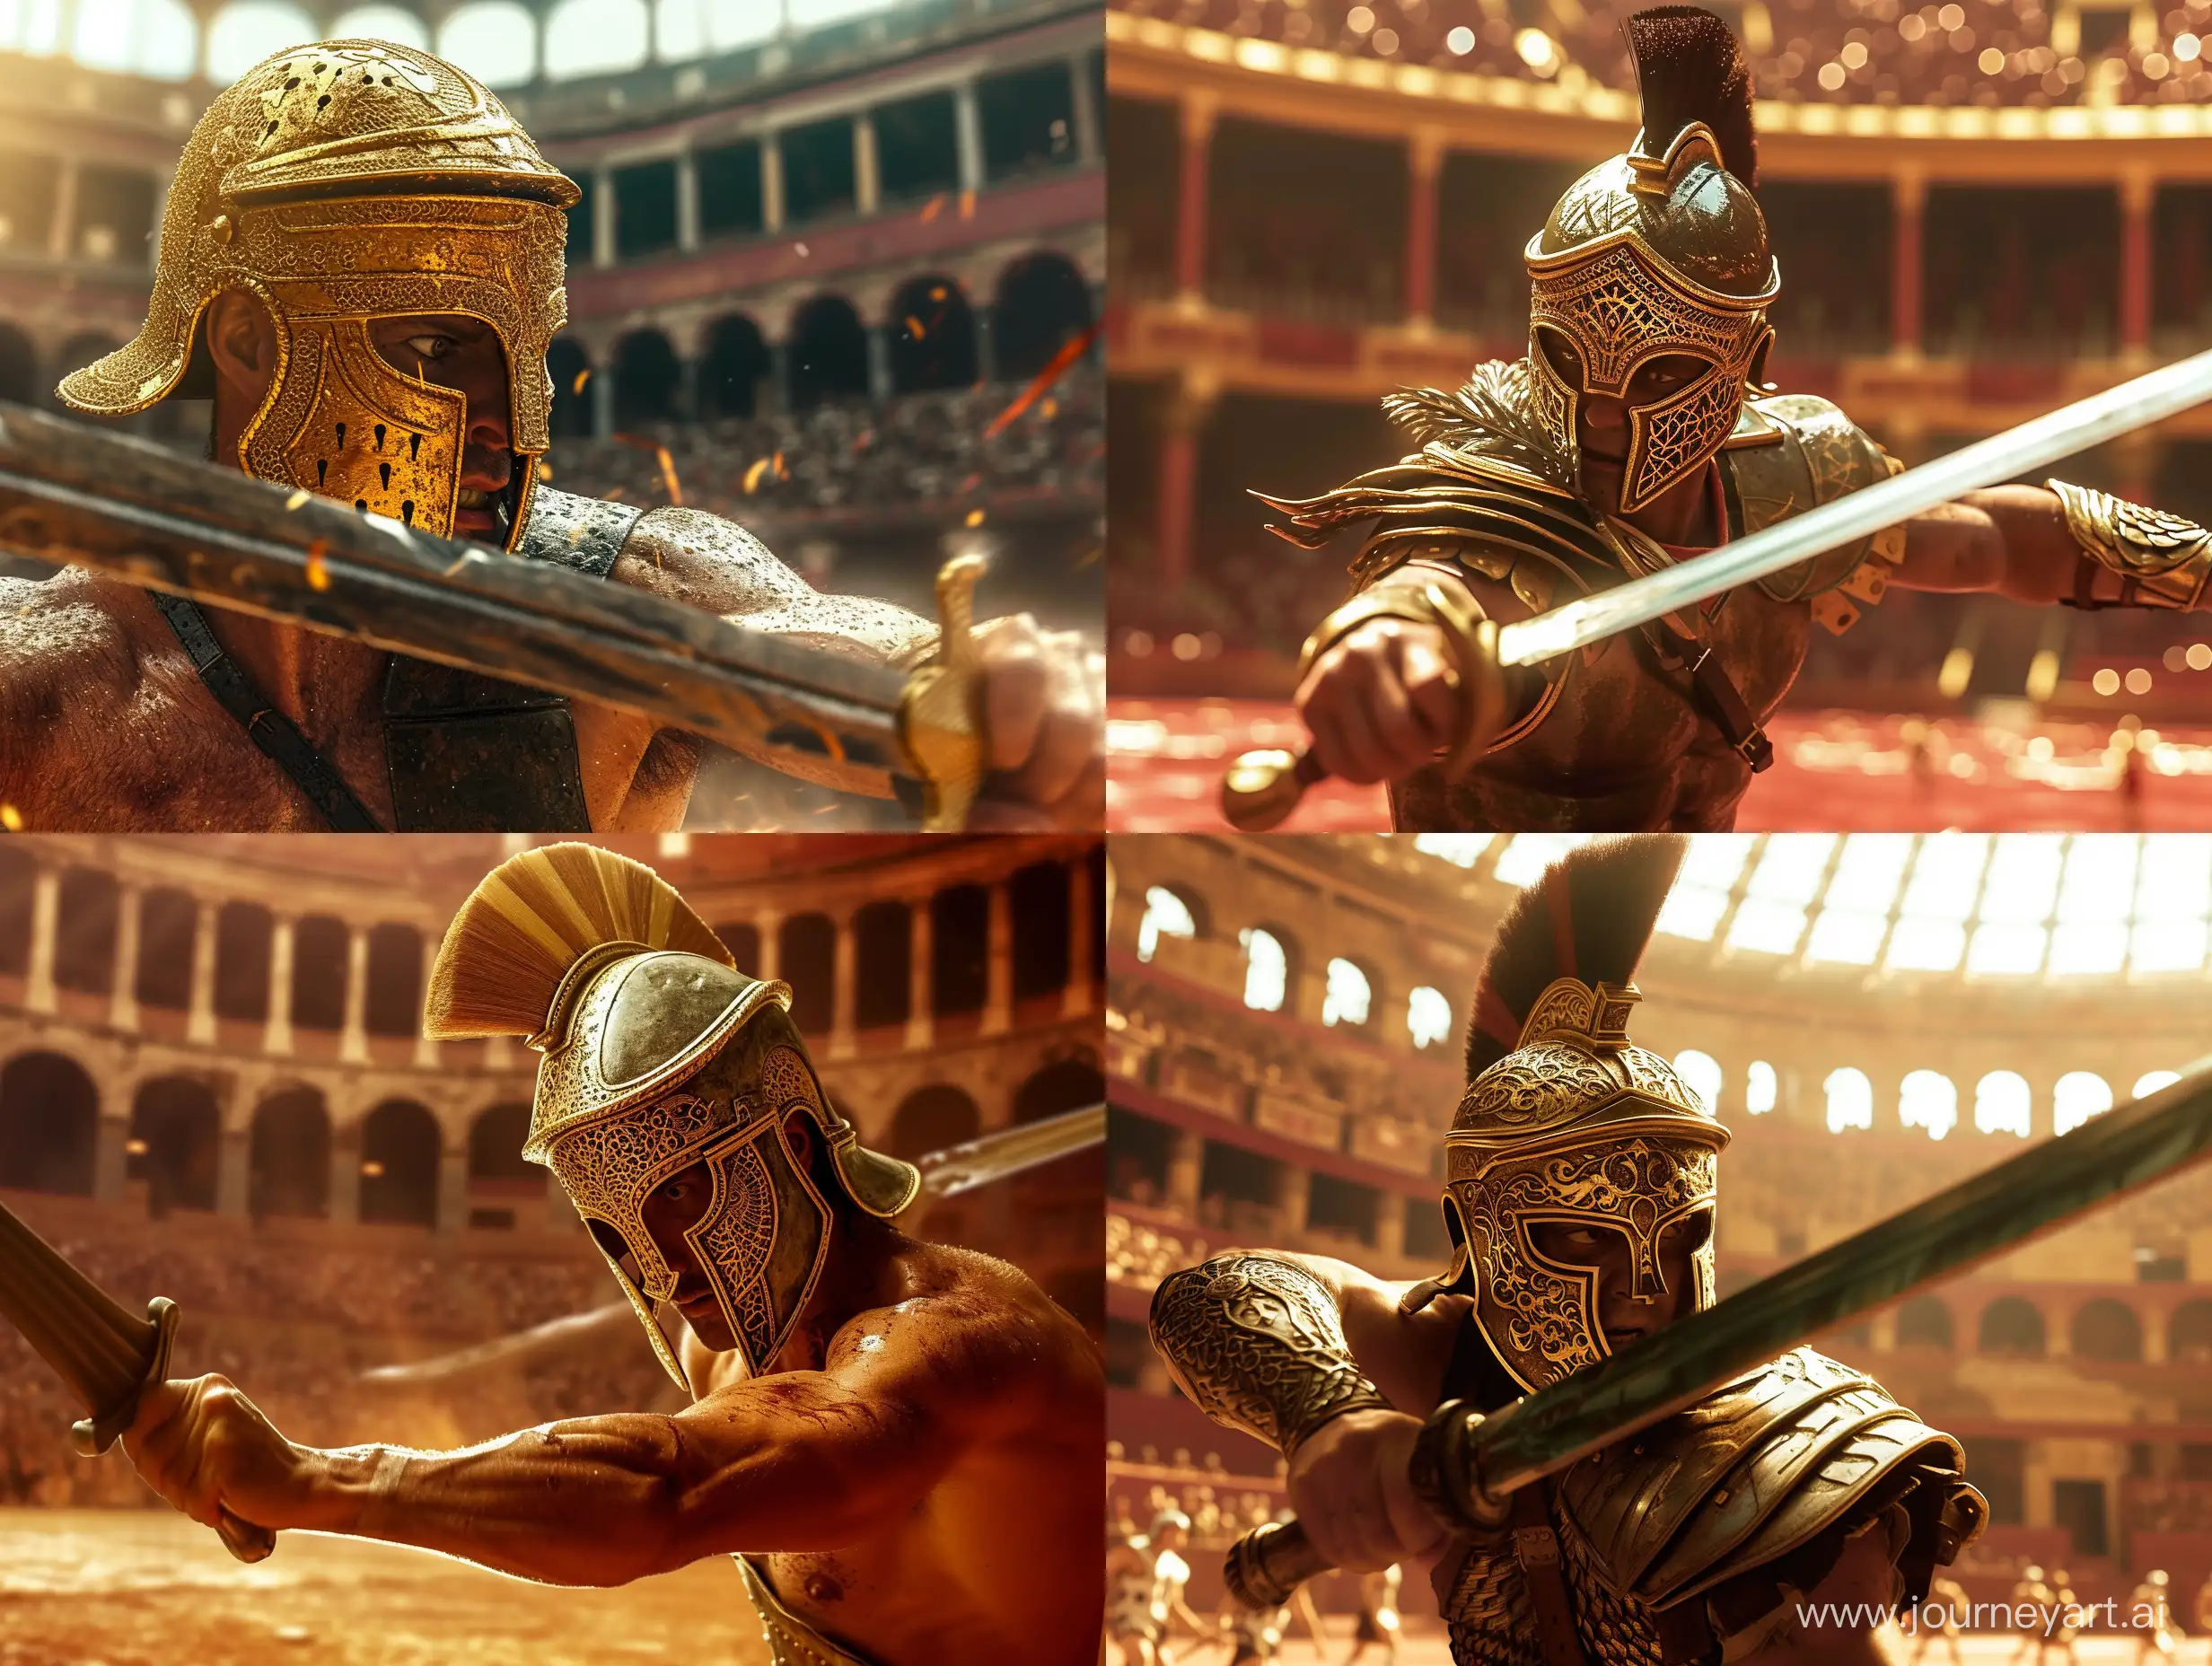 Create a high definition cinematic photo of a gladiator with a sword going into battle inside a coliseum. His helmet is golden filigree, covering his cheeks and nose like the classic spartan helmet.